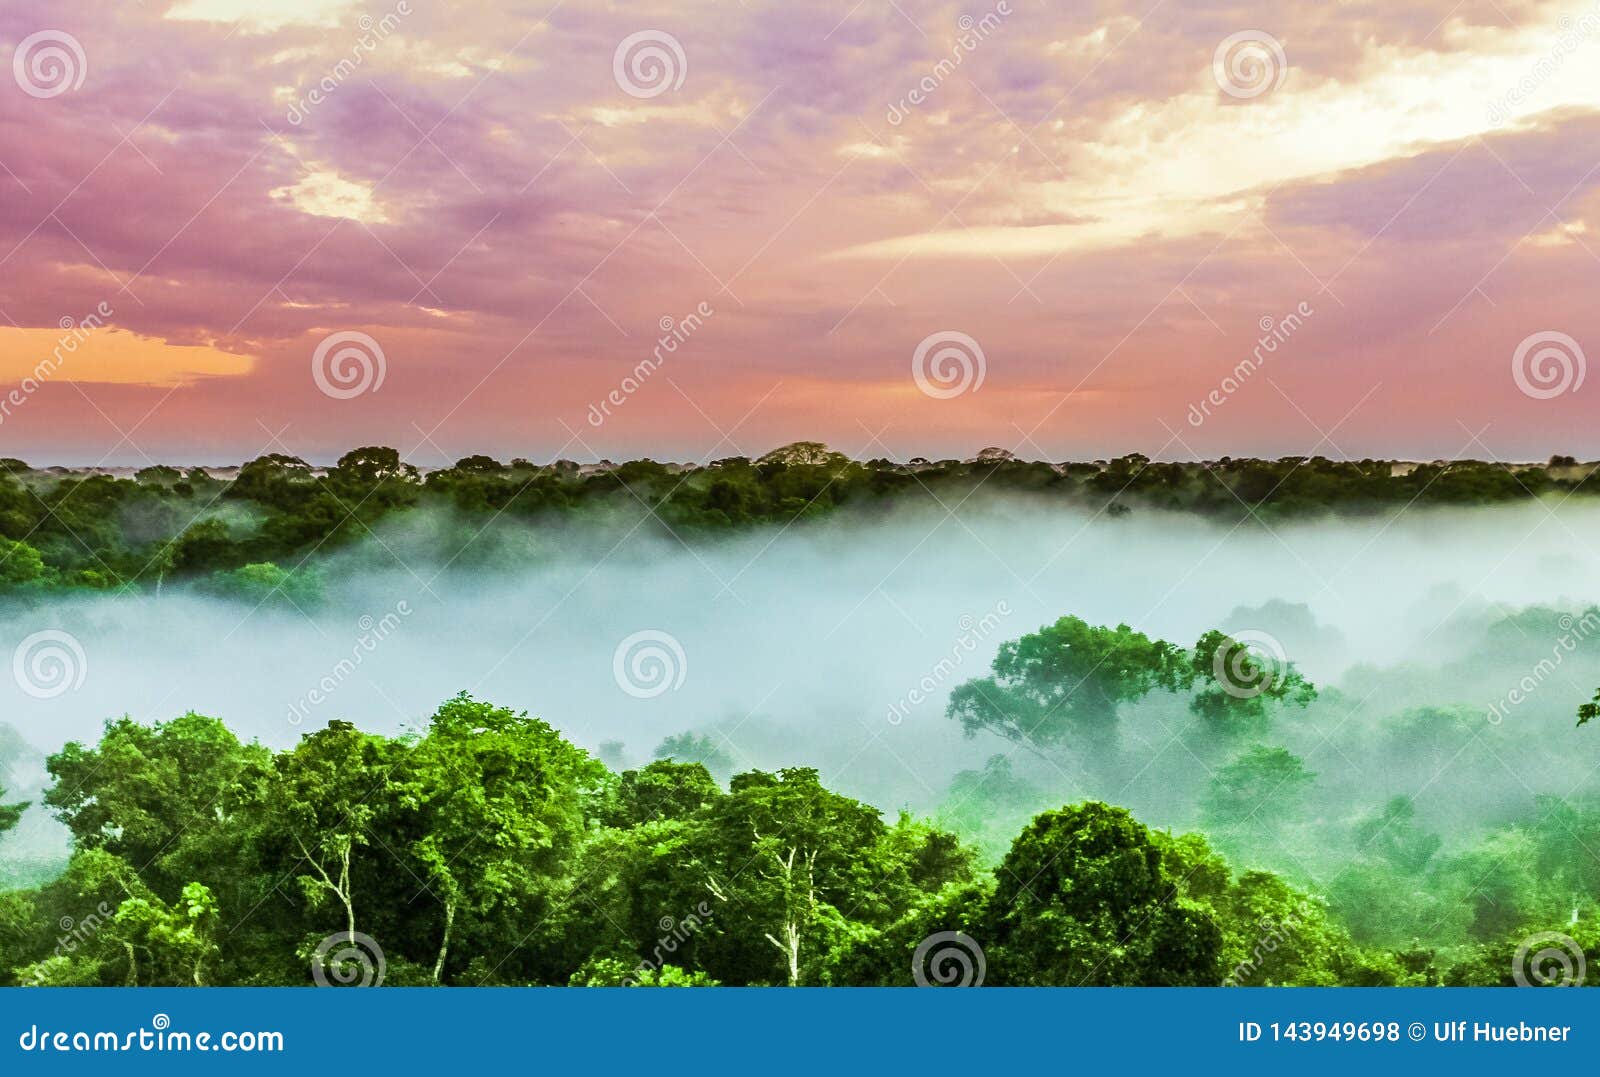 sunset over the trees in the brazilian rainforest of amazonas